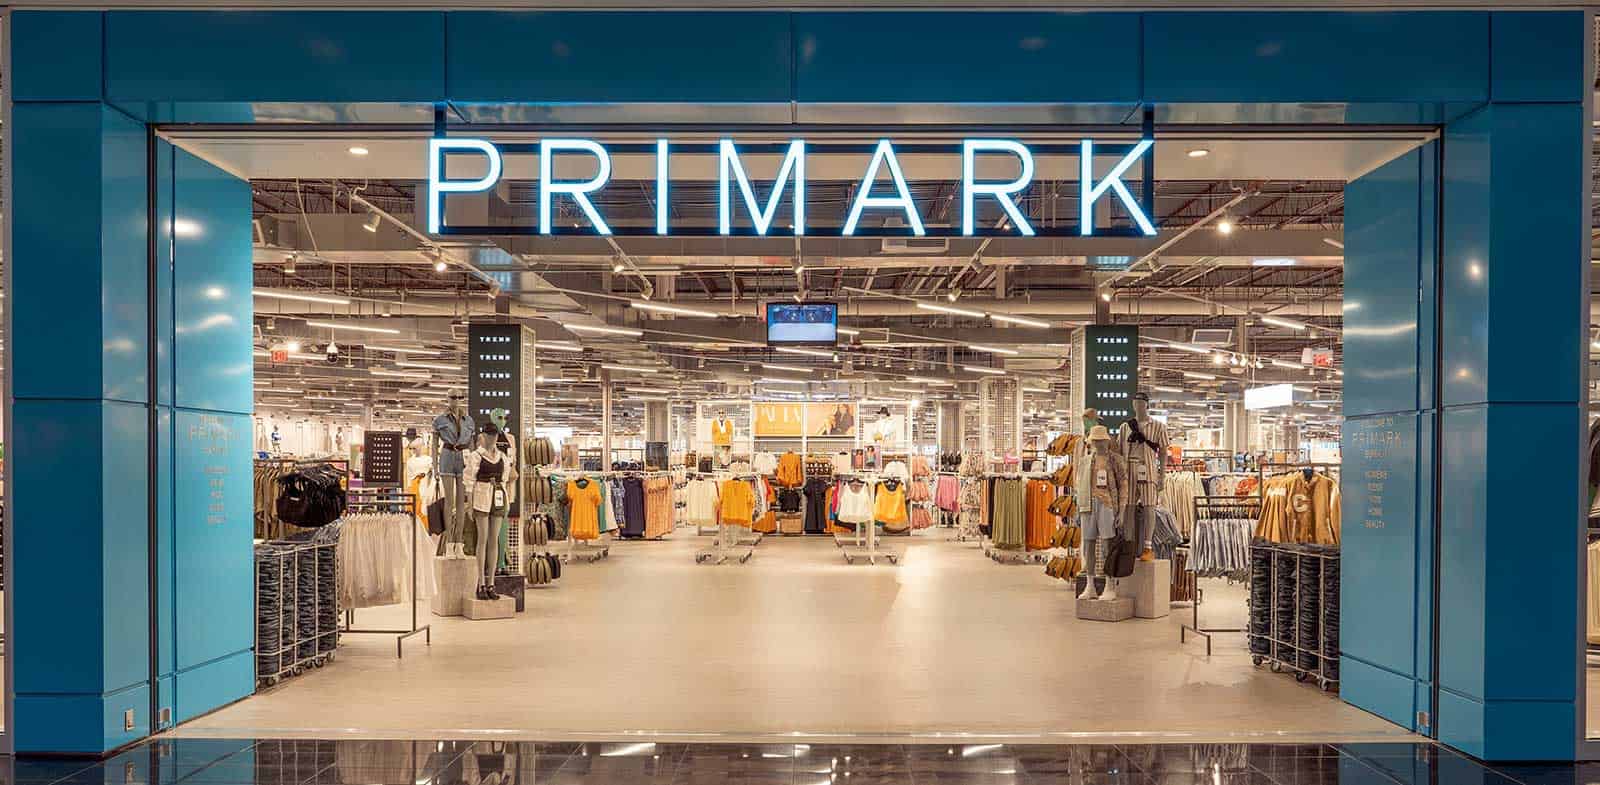 European Retailer Primark is Thriving With Only Brick-and-Mortar (not online) Stores